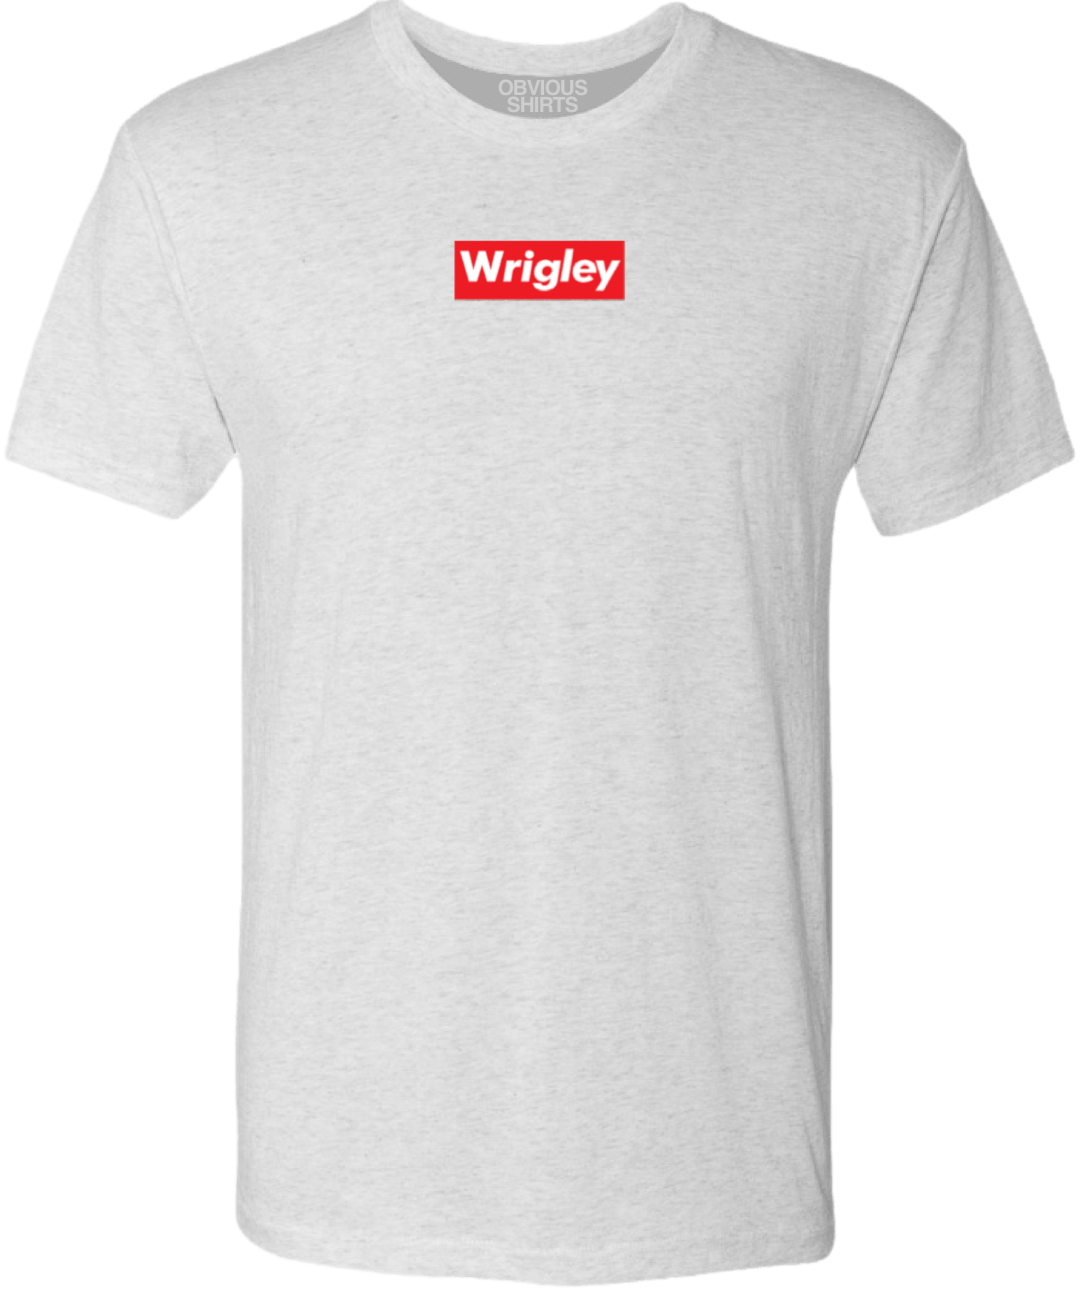 WRIGLEY IS SUPREME. - OBVIOUS SHIRTS